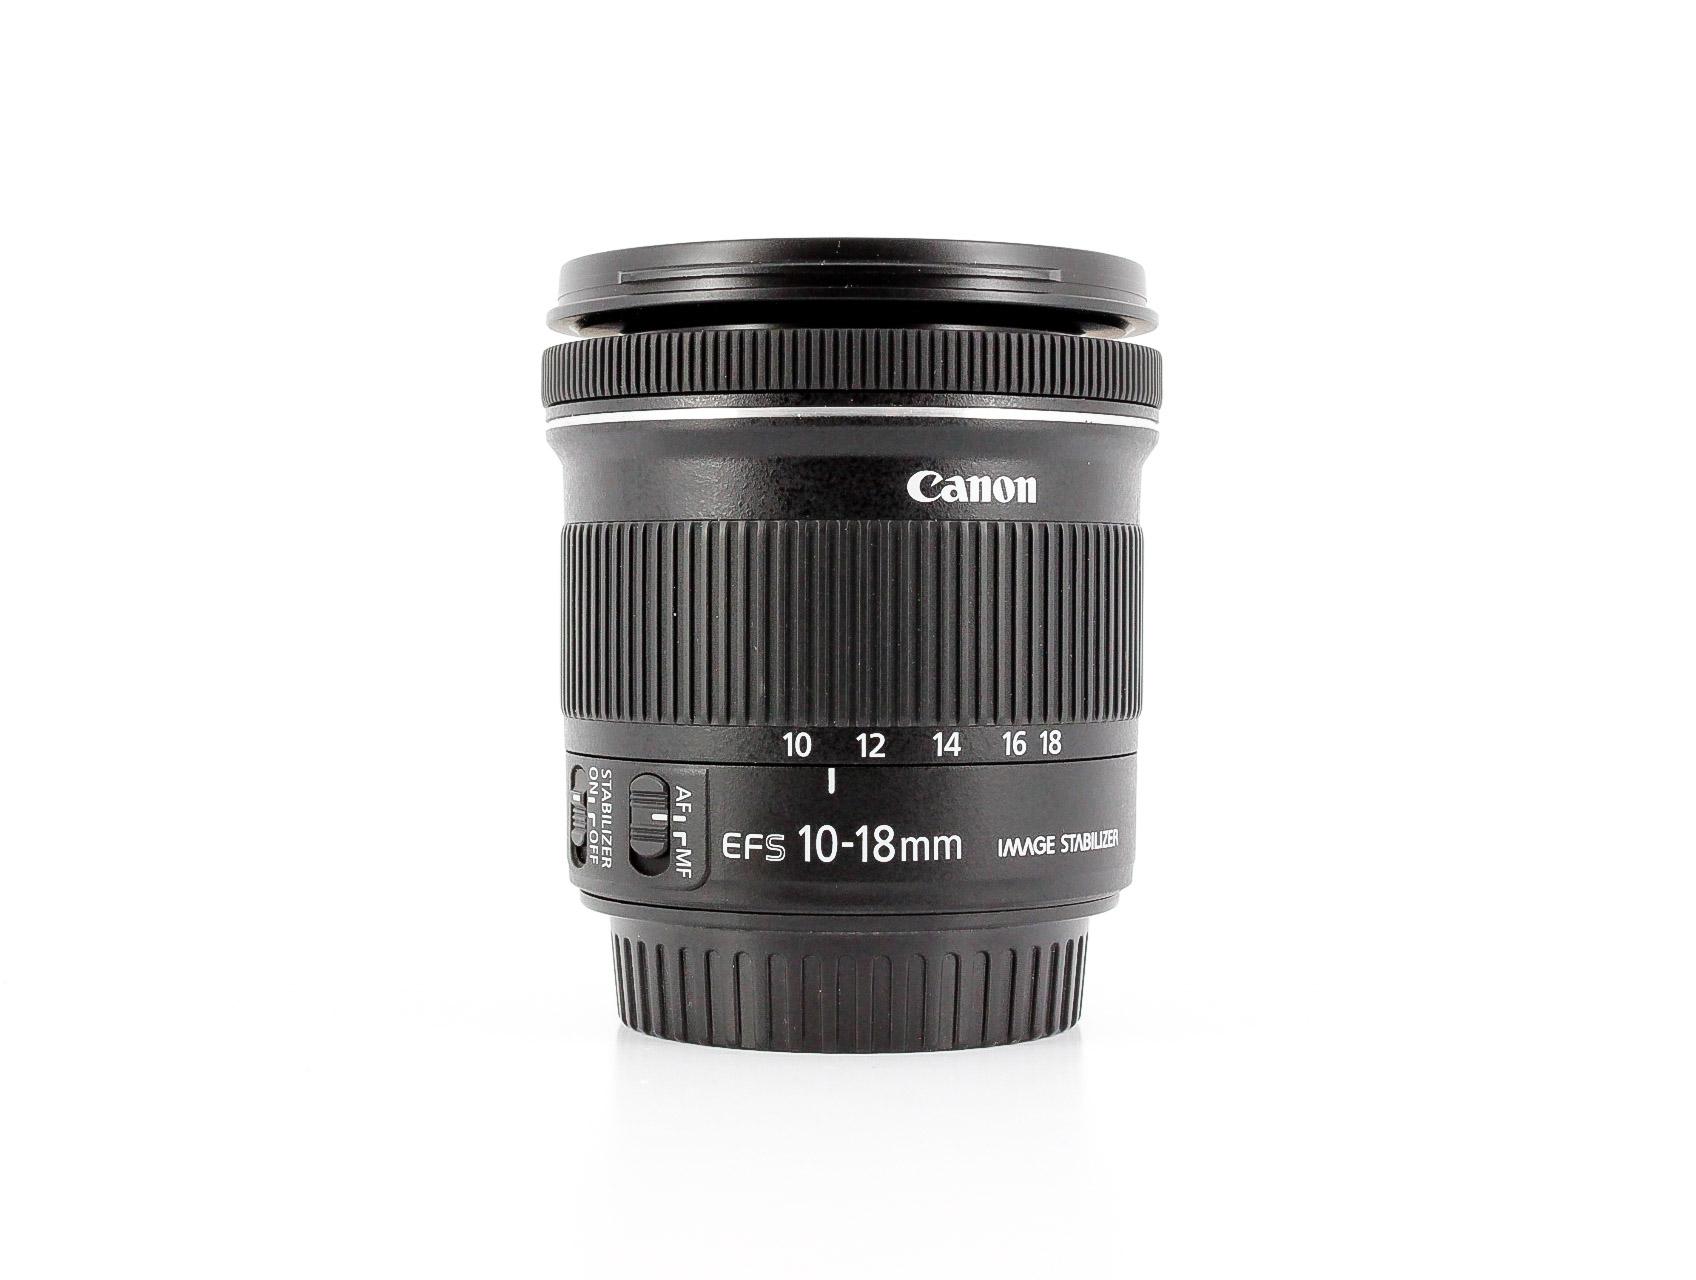 Canon EF-S 10-18mm F/4.5-5.6 IS STM Lens - Lenses and Cameras